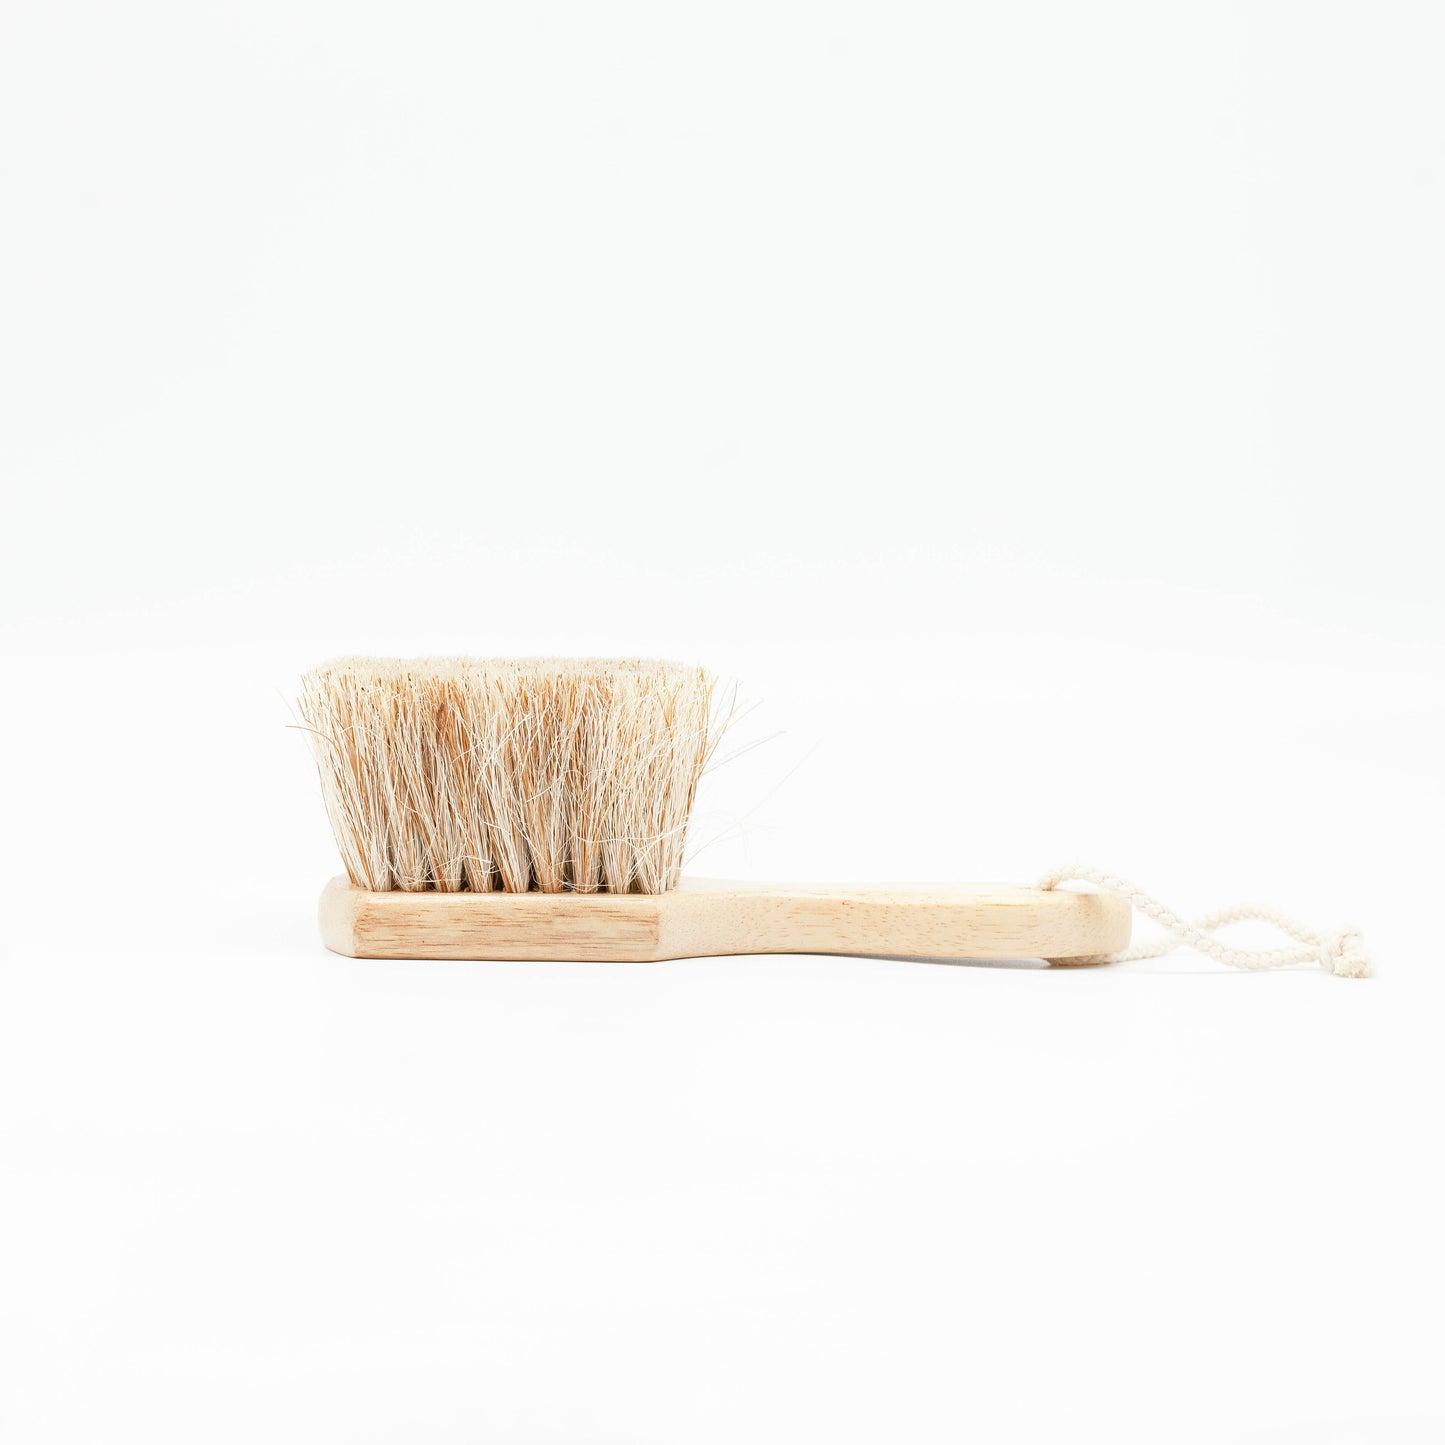 Sande Kids™ Sand Brush & Surf Brush made from sustainable materials -  rubberwood, coconut and jute. Remove wet or dry sand from kids, adults, beach toys, surfboards, dog paws and car upholstery